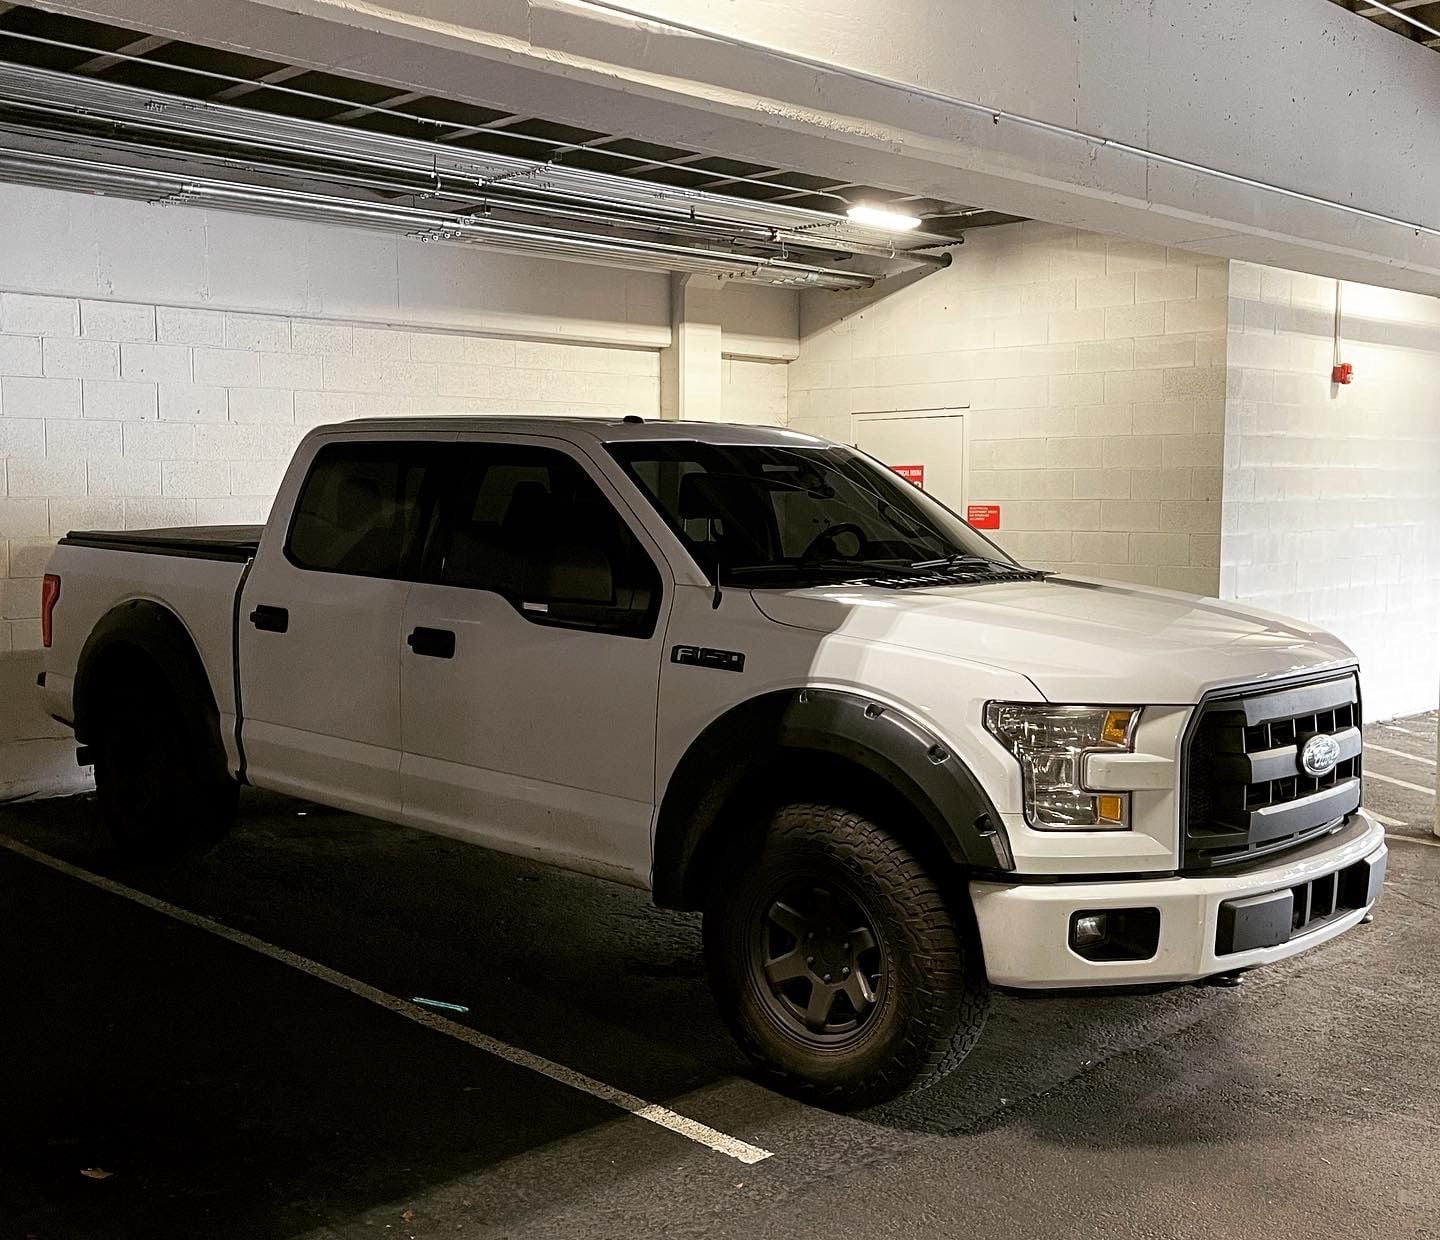 2016 F150 4x4 SuperCrew XLT 2.7 EcoBoost Build - Page 58 - Ford F150 2016 Ford F 150 2.7 Ecoboost Problems